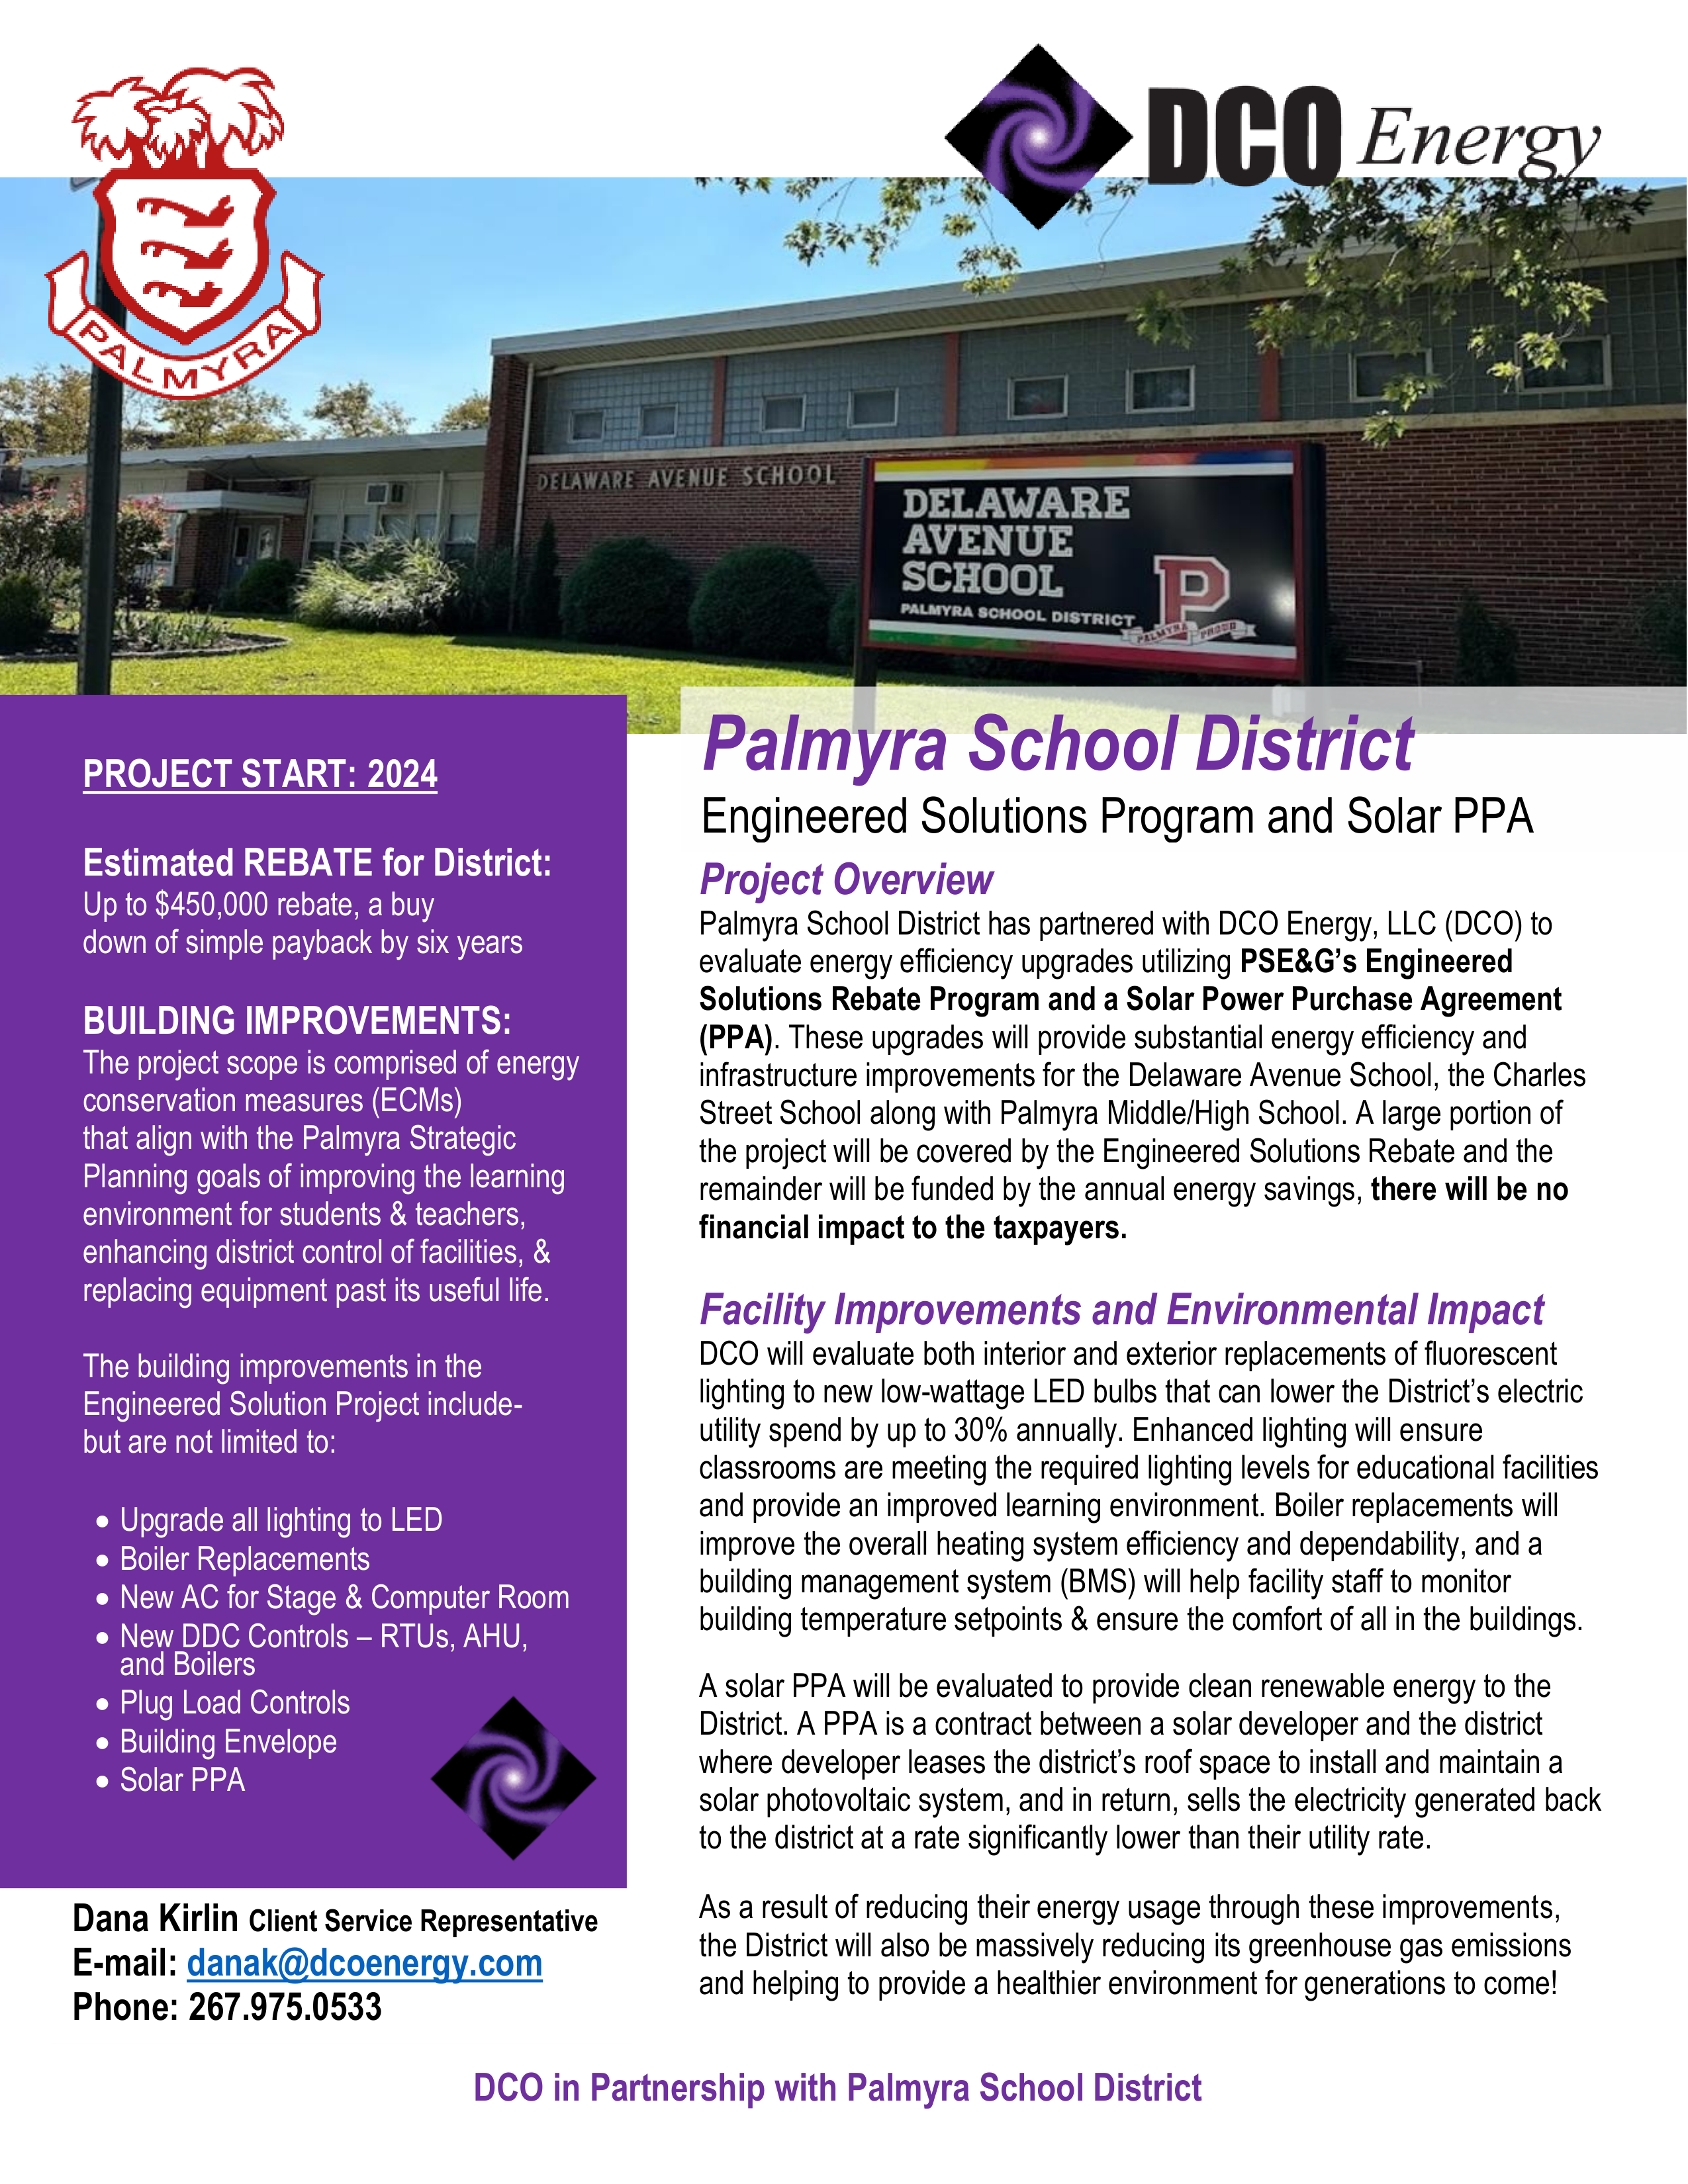 flyer for dco energy in palmyra with delaware avenue school pictured